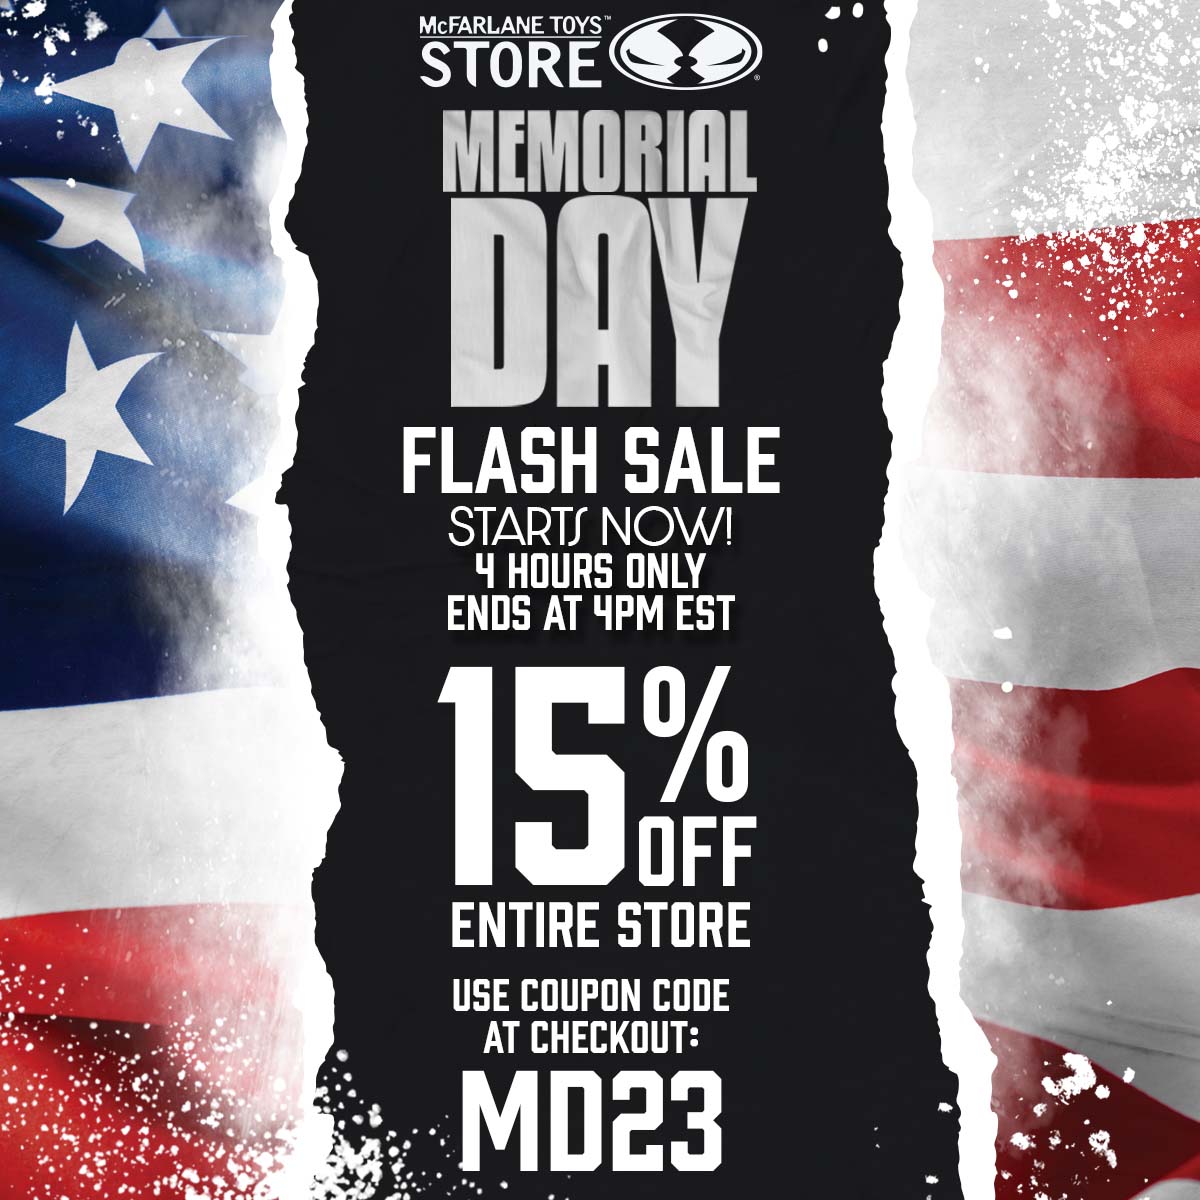 In Honor of Memorial Day, McFarlane Toys Store is offering 15% OFF storewide. Use code 'MD23' at checkout. Limited Time Only!

➡️ mcfarlanetoysstore.com

#McFarlaneToys #McFarlaneToysStore #MemorialDaySale